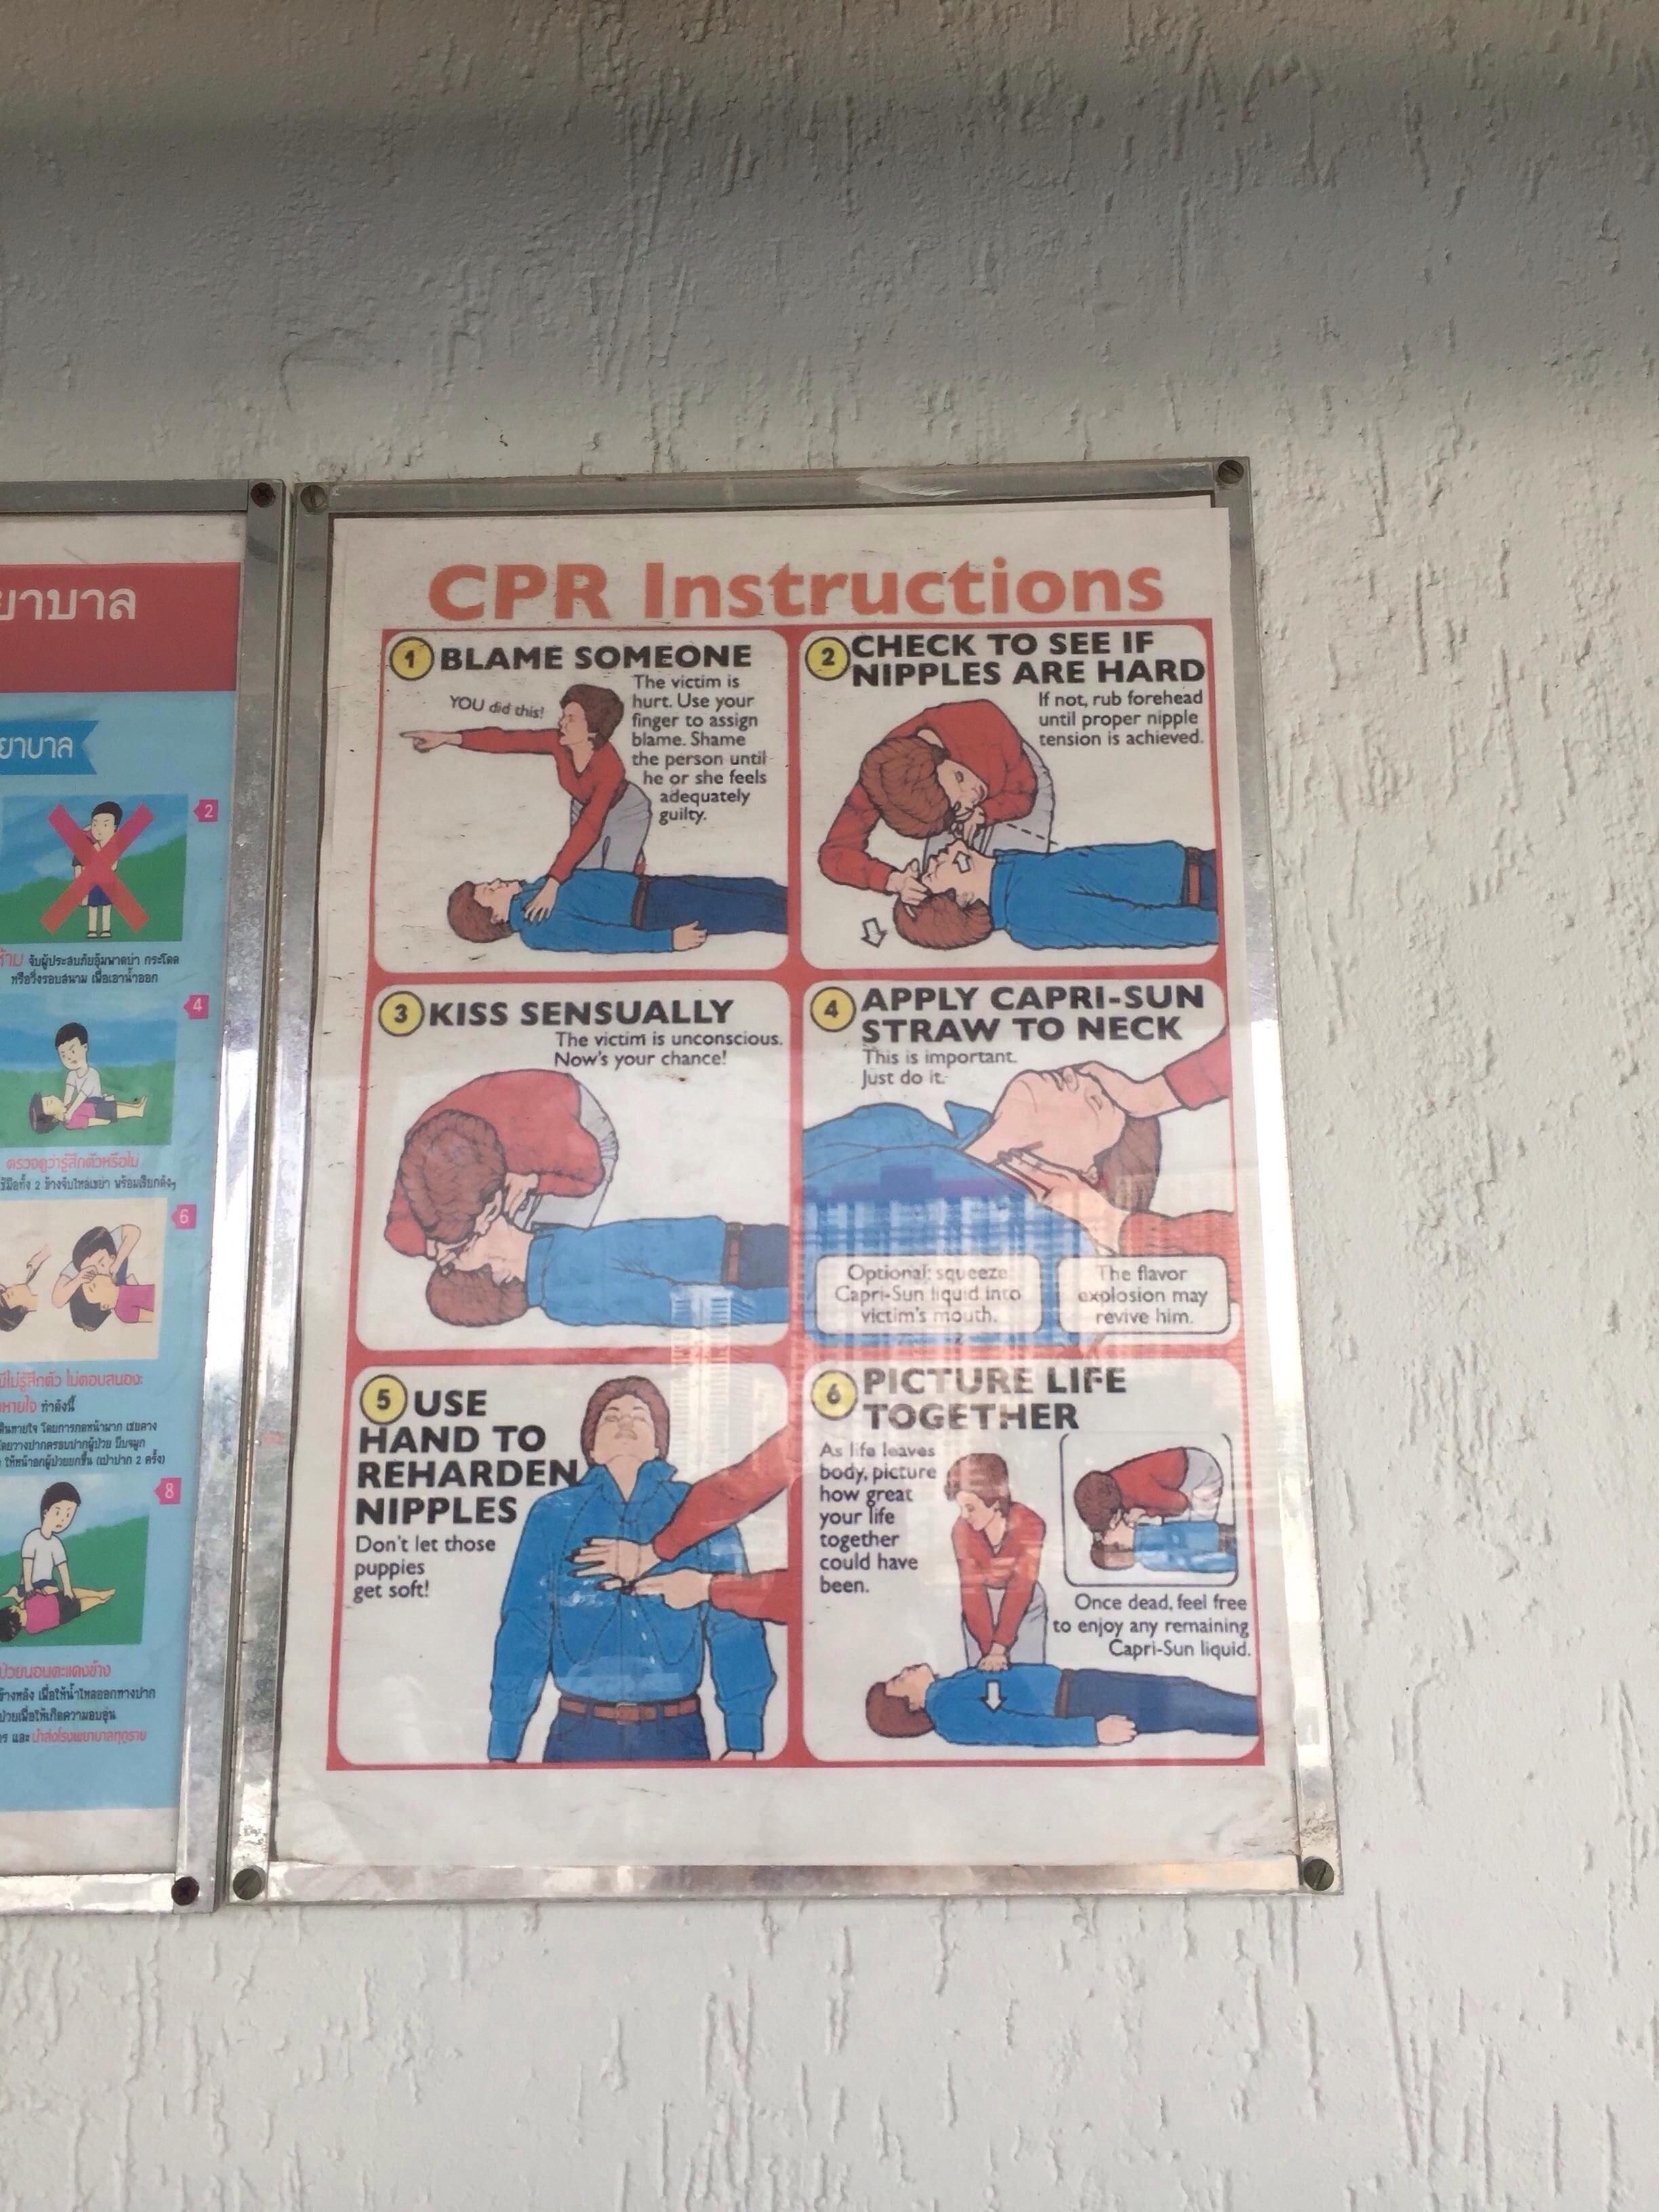 Thailand trolled again. CPR Instructions next to the hotel pool. They haven't the slightest clue...